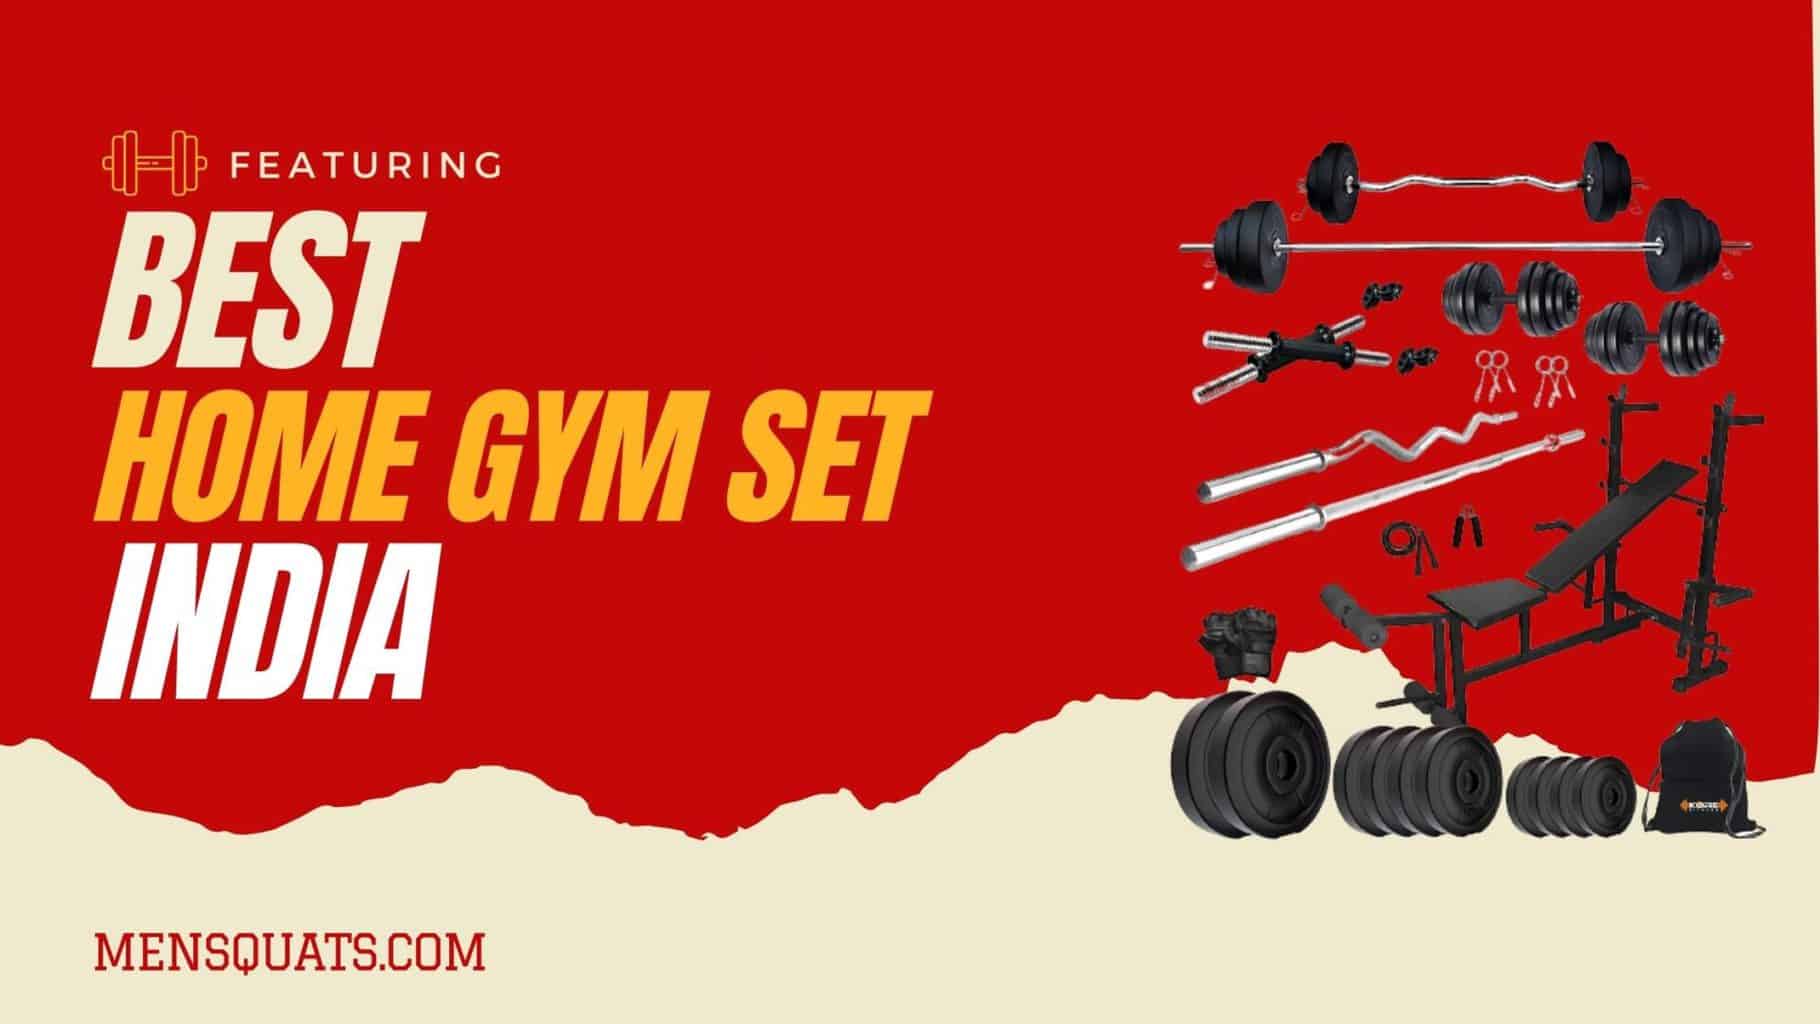 Top-Best-50kg-home-gym-set-with-bench-India-mensquats